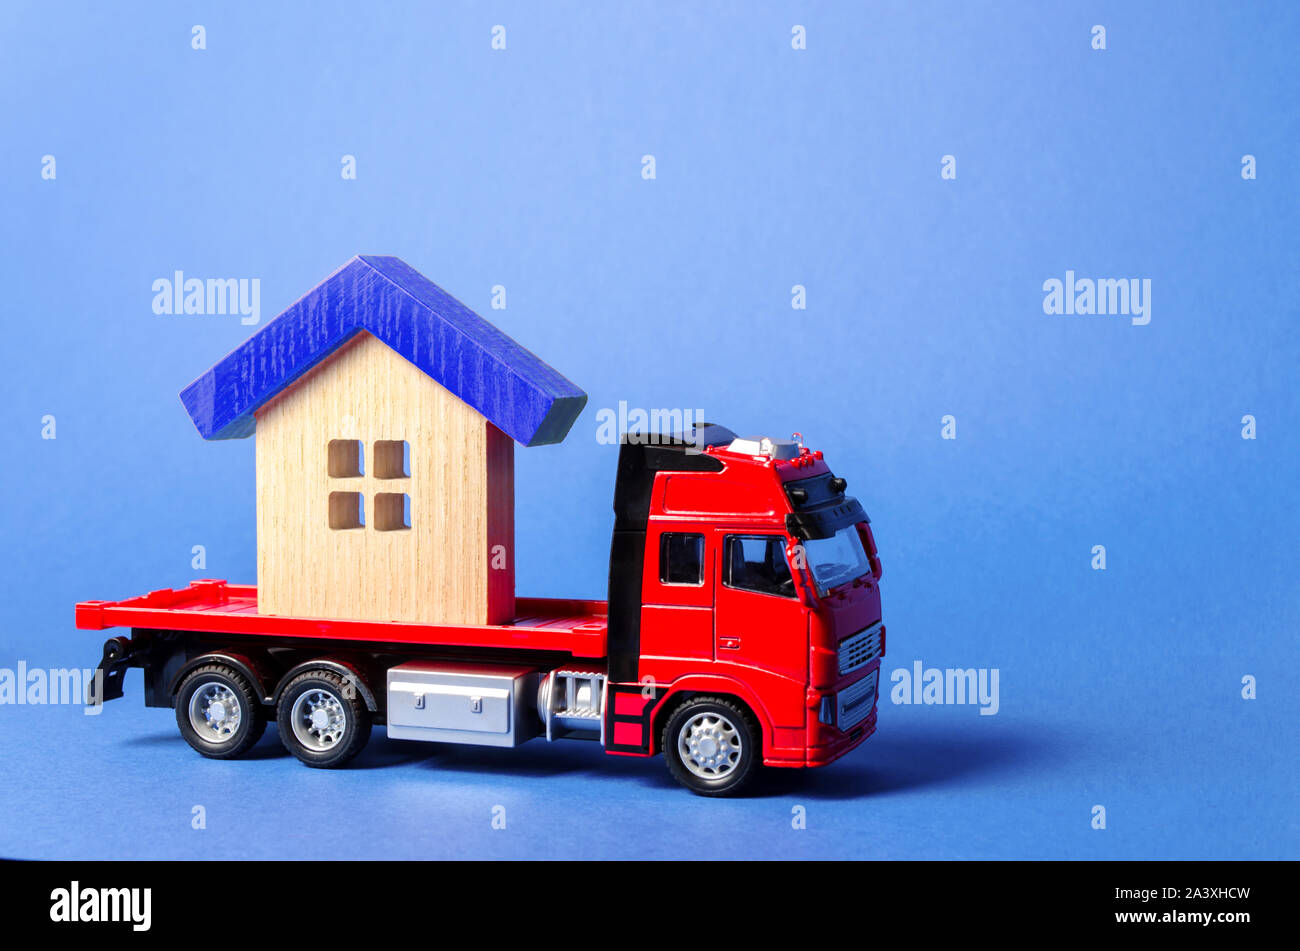 Red truck carrier transports a blue roofed house. Concept of transportation and cargo shipping, moving company. Construction of new houses and objects Stock Photo